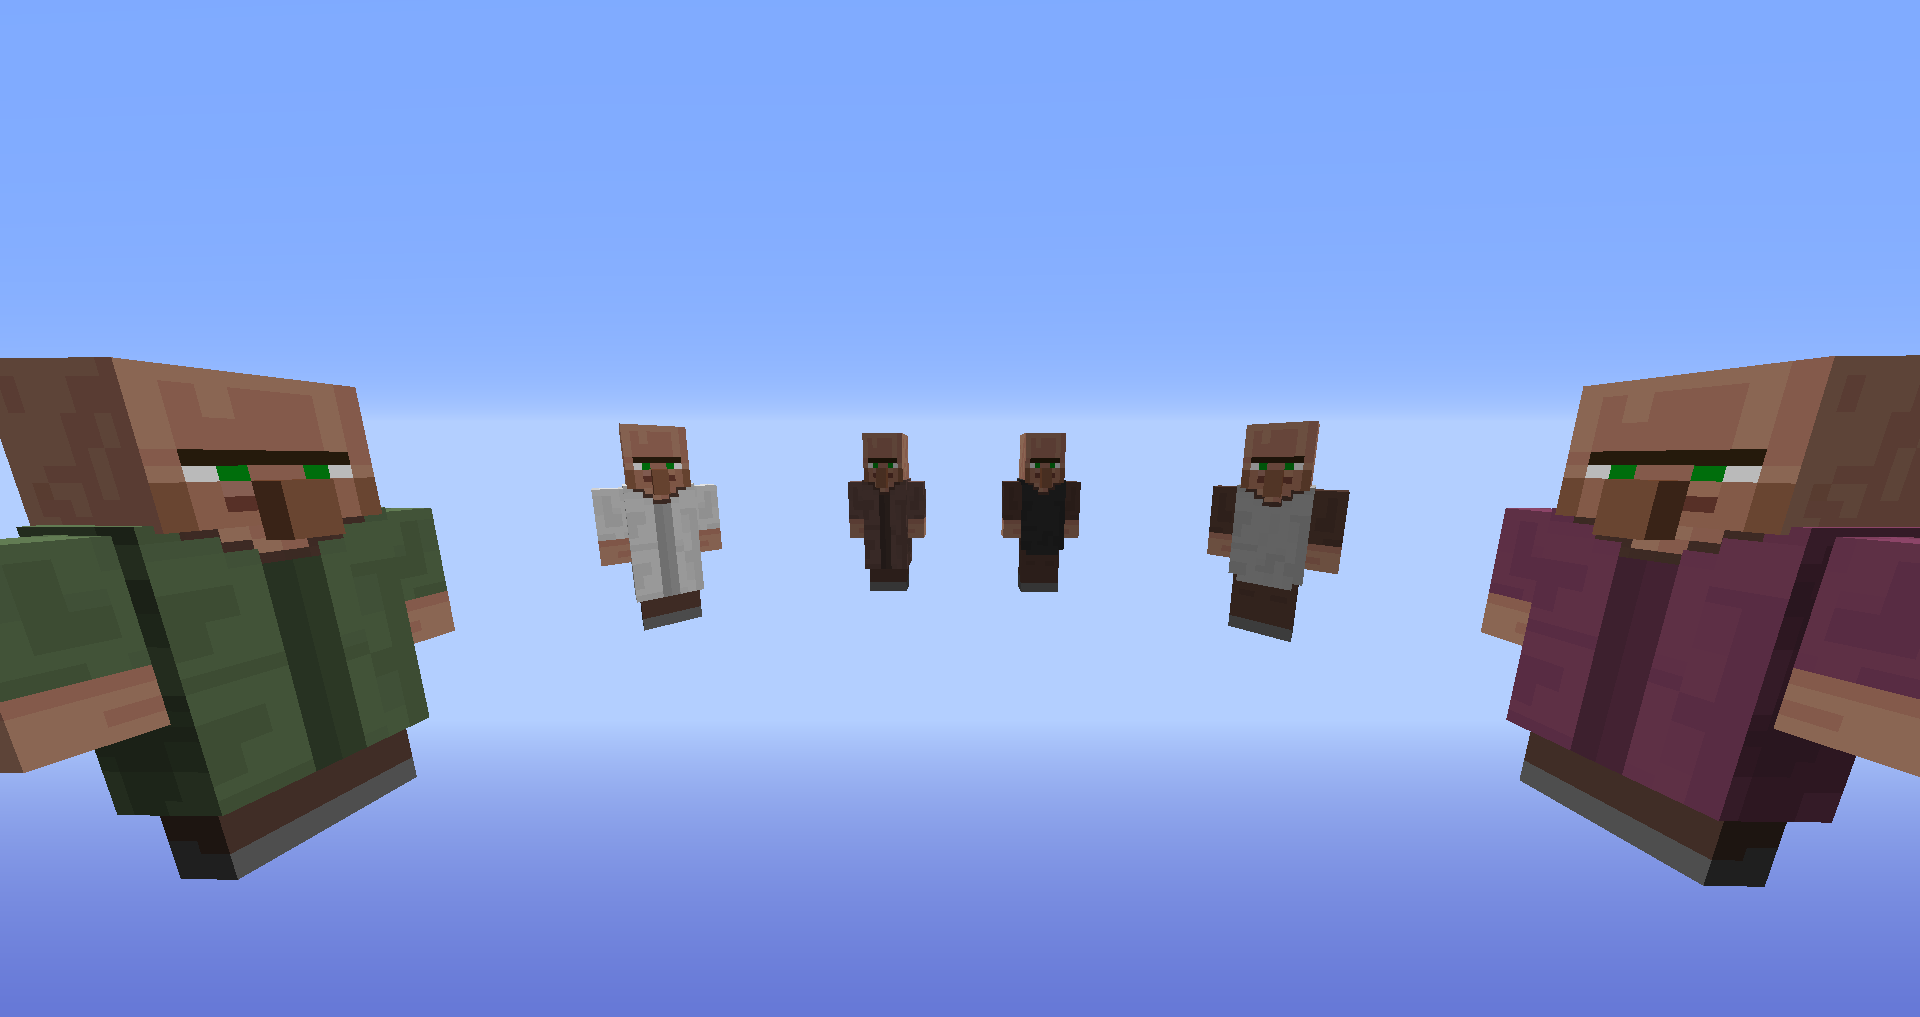 All the villagers